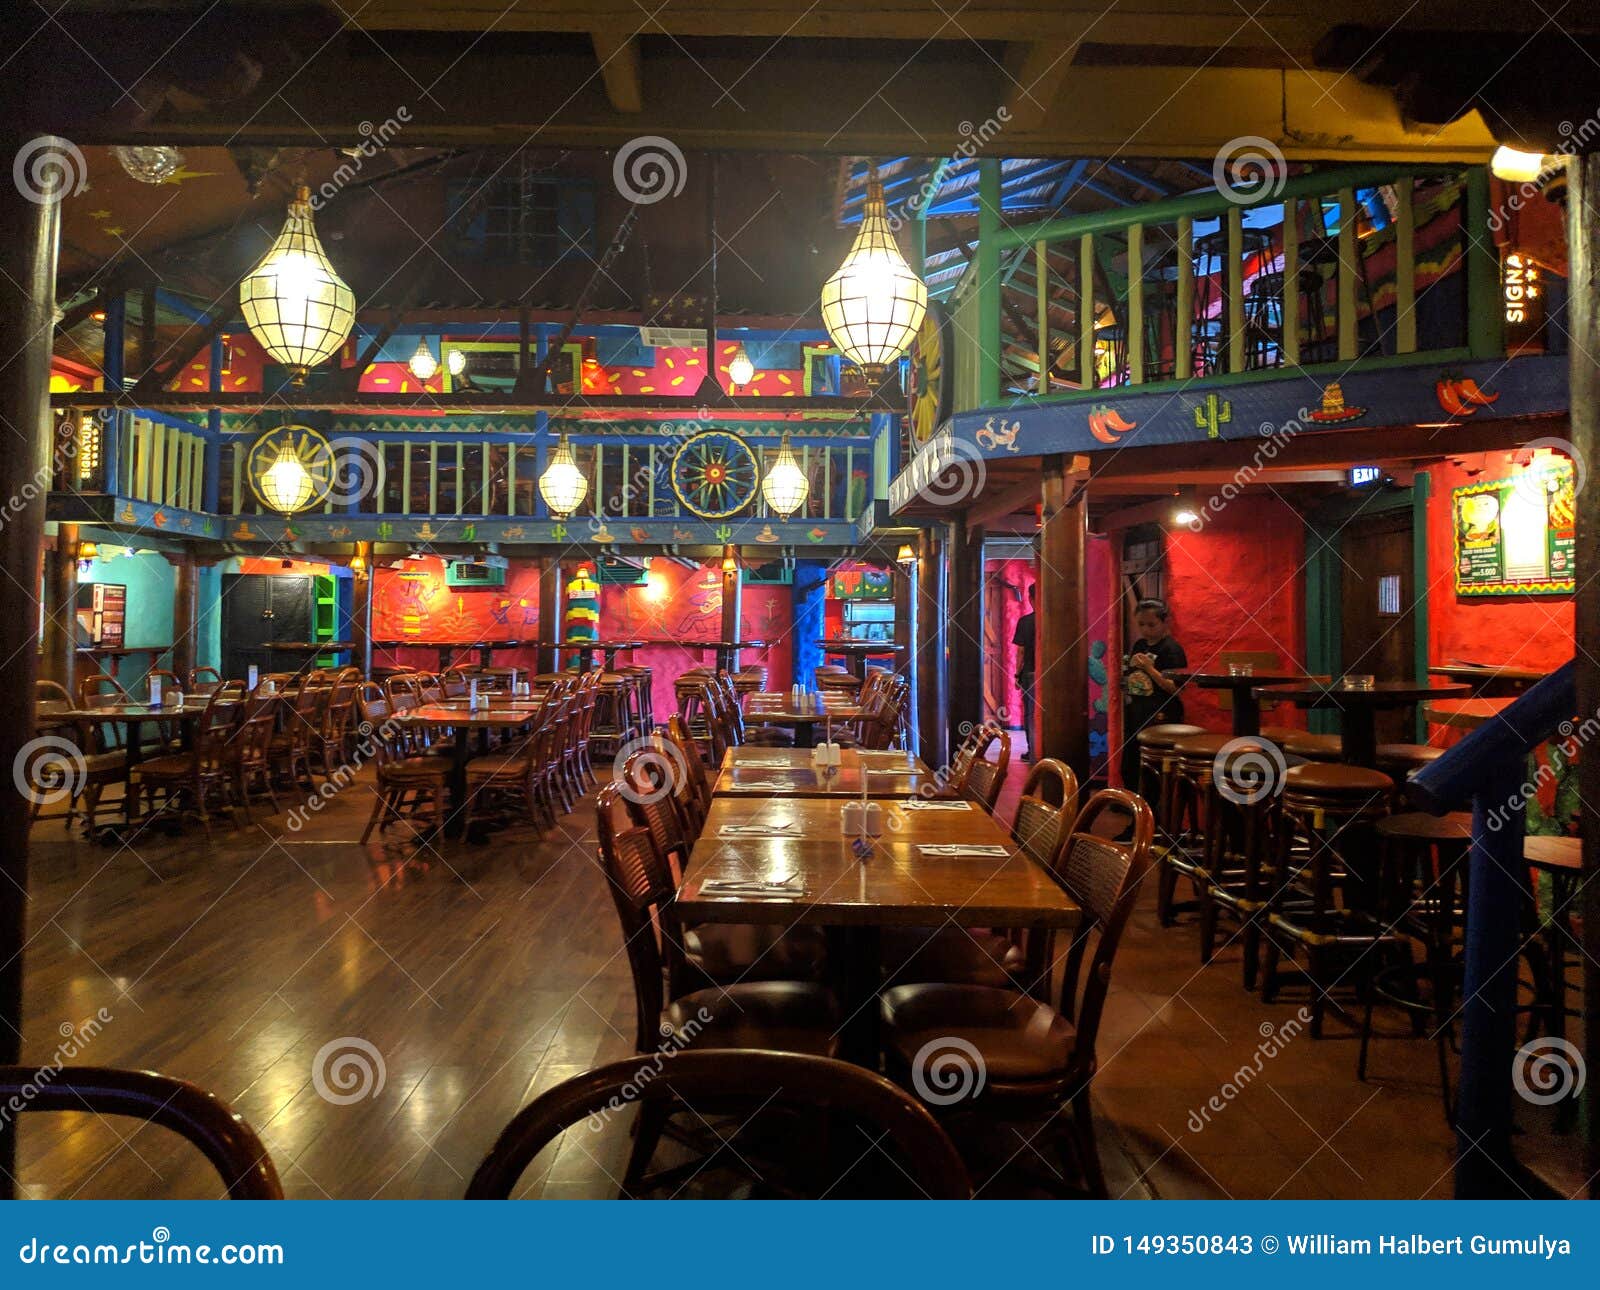 Colorful Mexican Restaurant in Jakarta Editorial Stock Photo - Image of